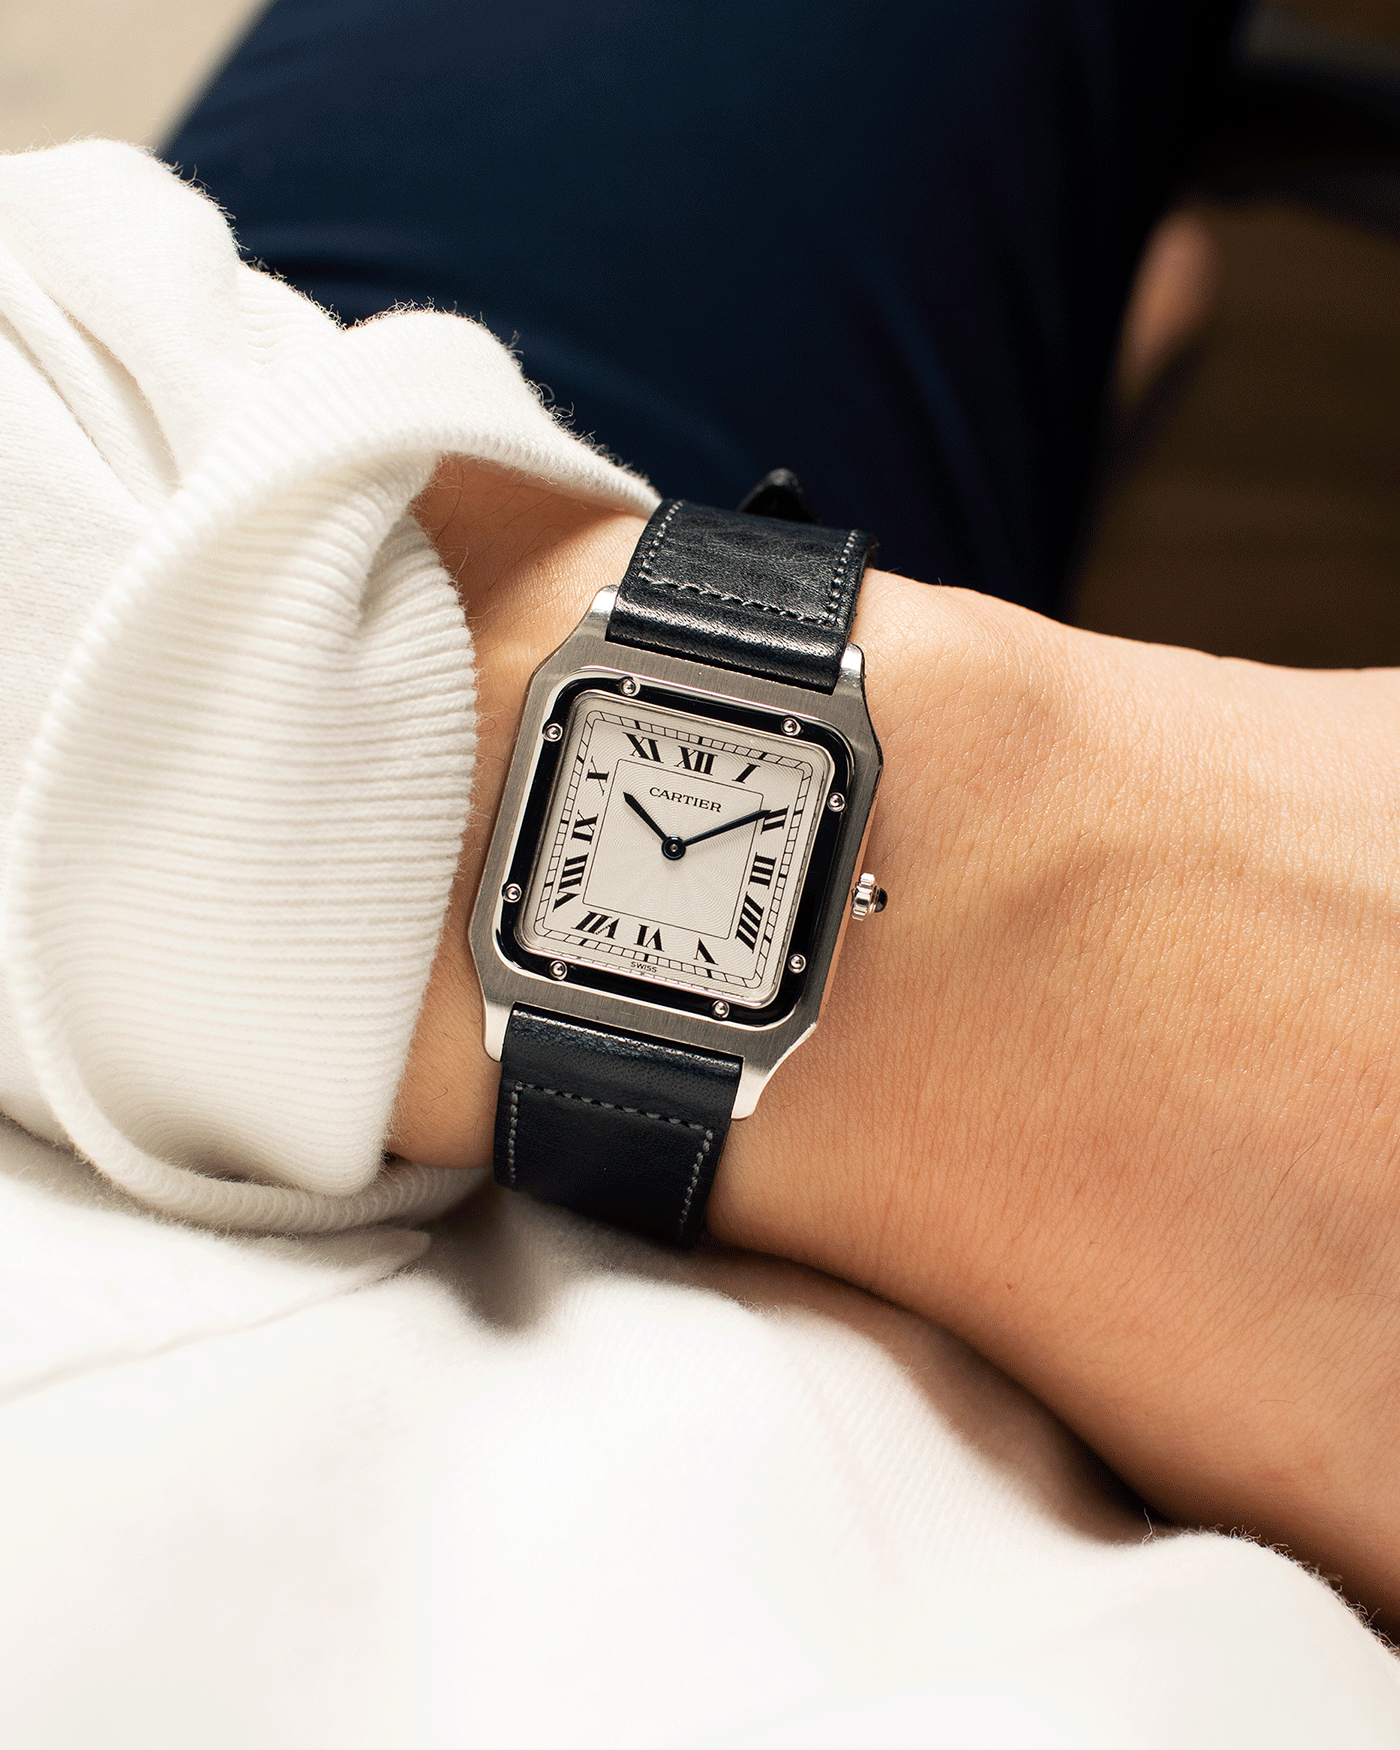 Brand: Cartier Year: 1990s Model: Santos Dumont Reference: 1575 Material: Platinum Movement: F.Piguet 21 Case Diameter: 27mm Strap: Accurate Form Navy Blue Japanese Calf and 18k White Gold Cartier Tang Buckle